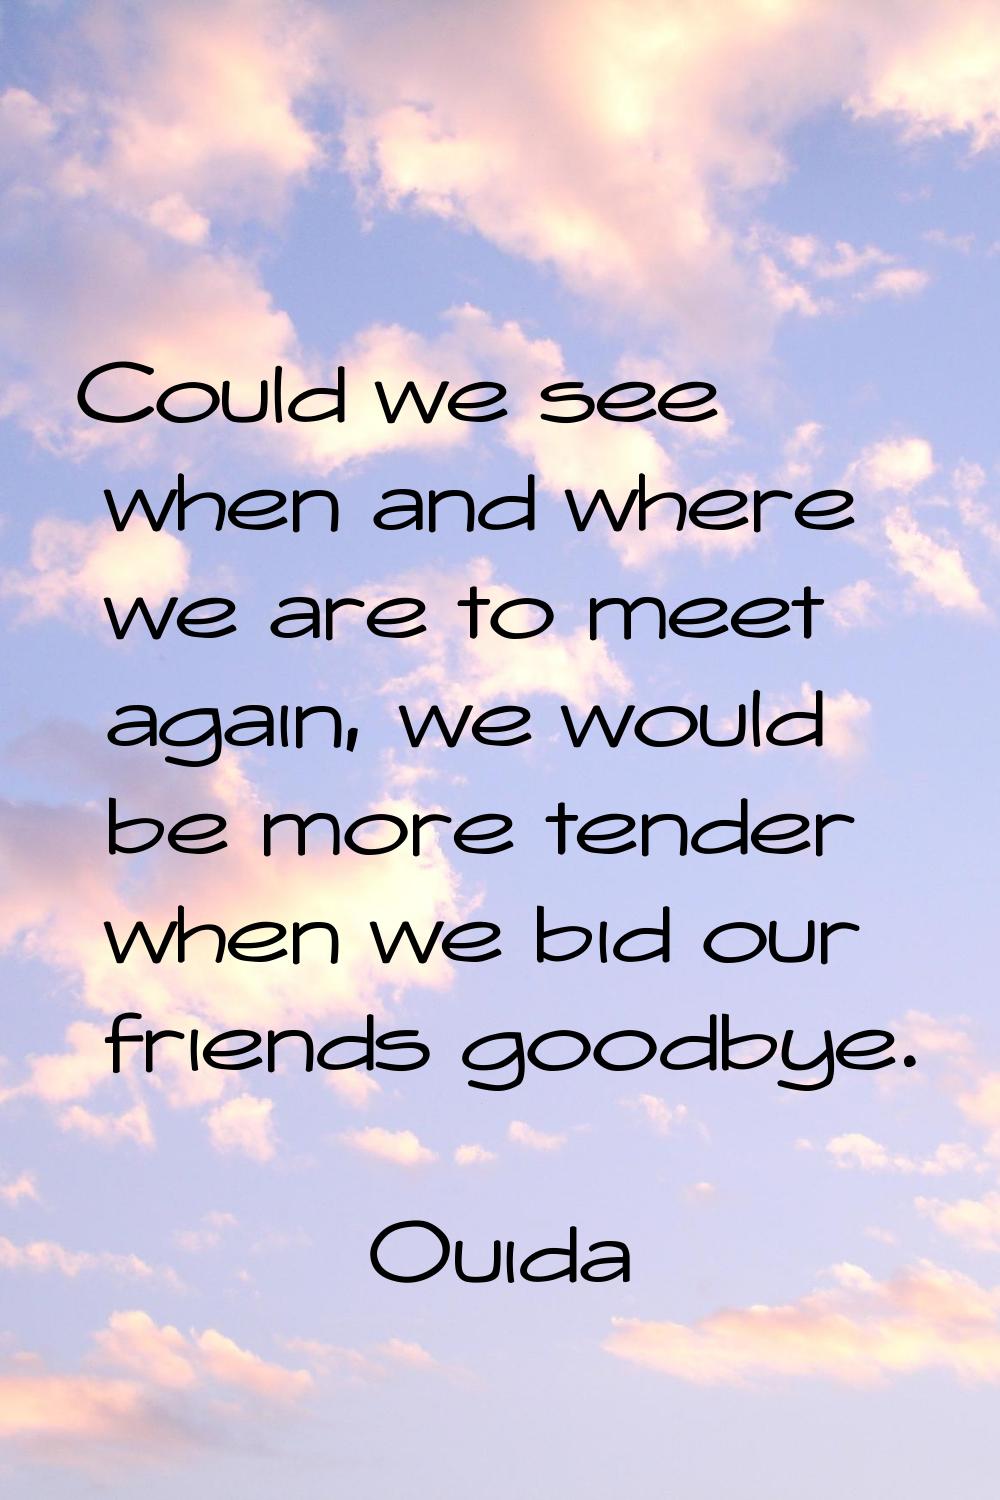 Could we see when and where we are to meet again, we would be more tender when we bid our friends g